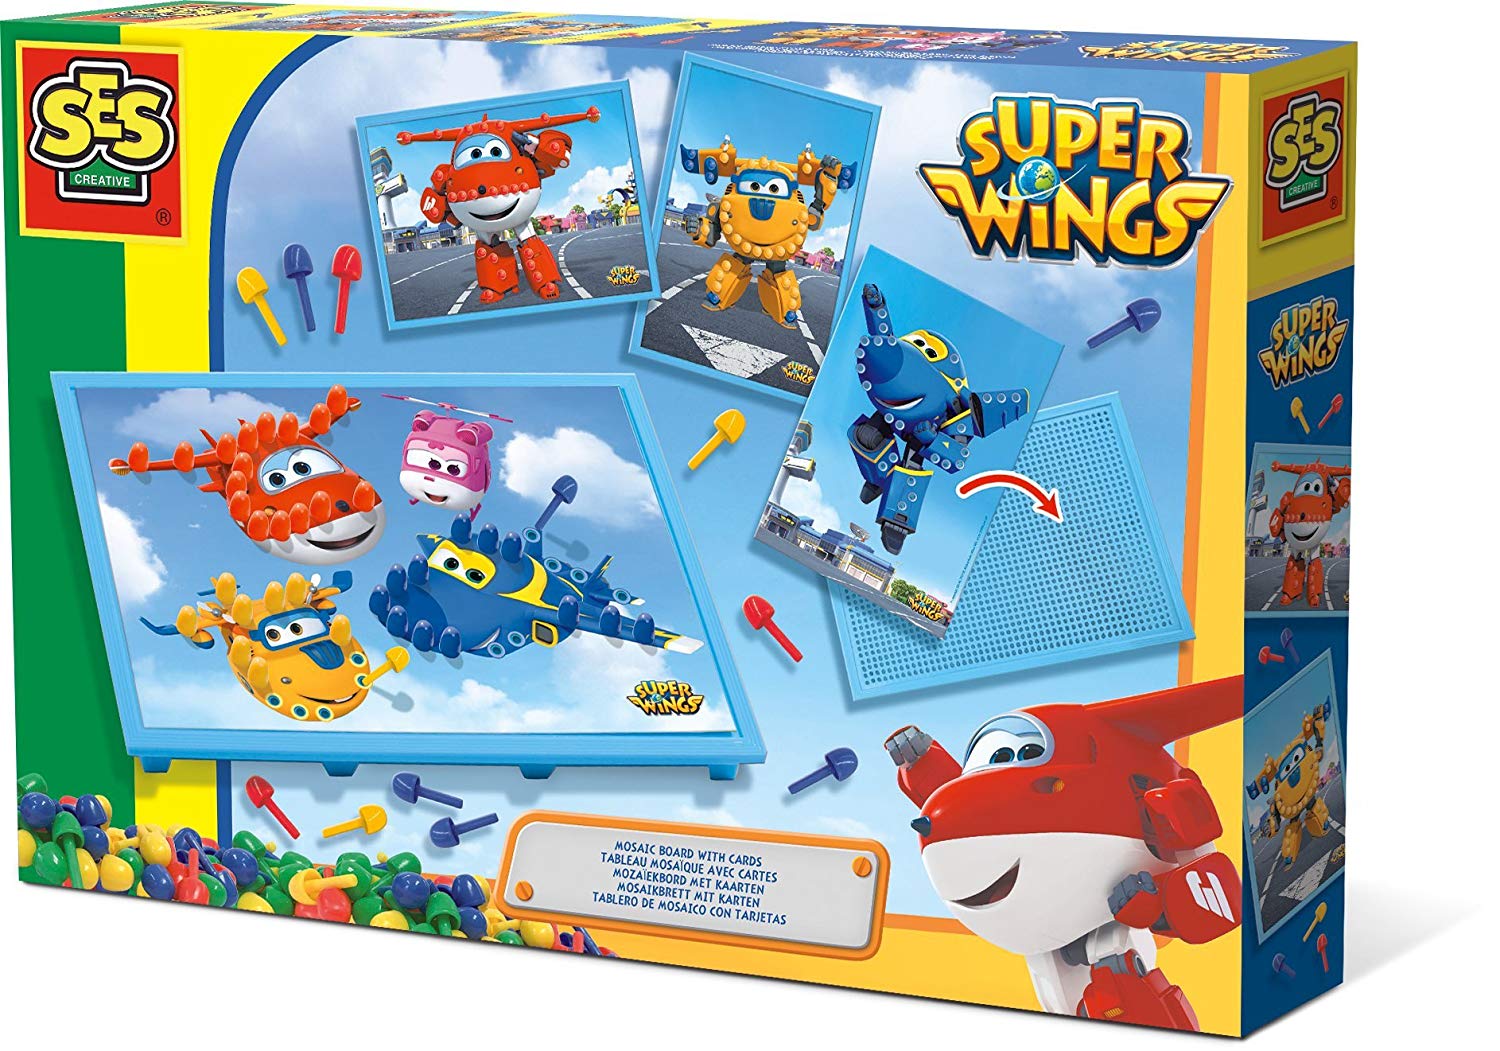 Mosaic Board With Super Wings Cards